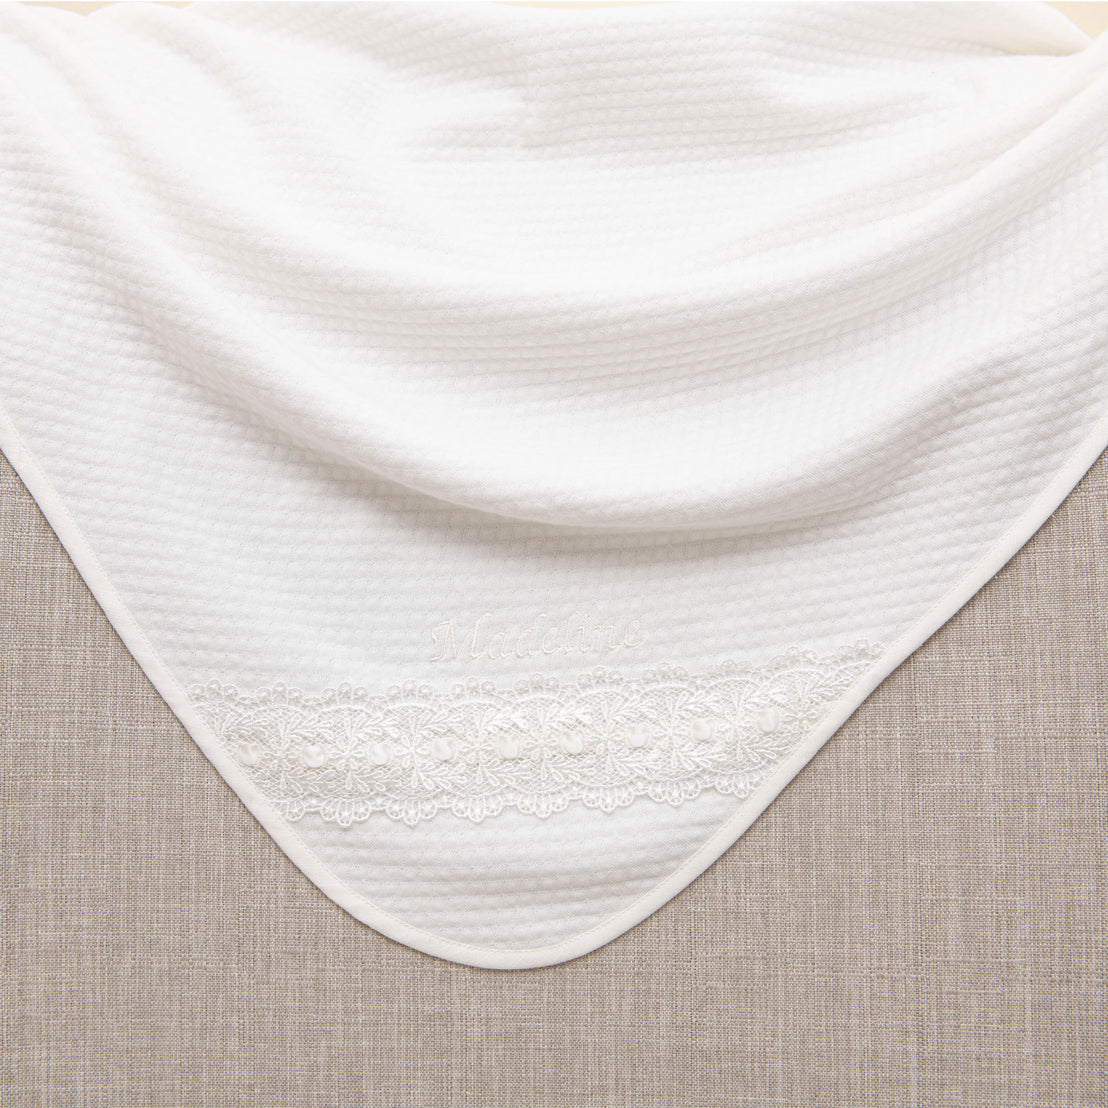 Madeline Blanket with detailed lace trim on a beige background, perfect as a boutique baby gift. It is designed in a curved triangular shape, emphasizing its soft, plush texture.